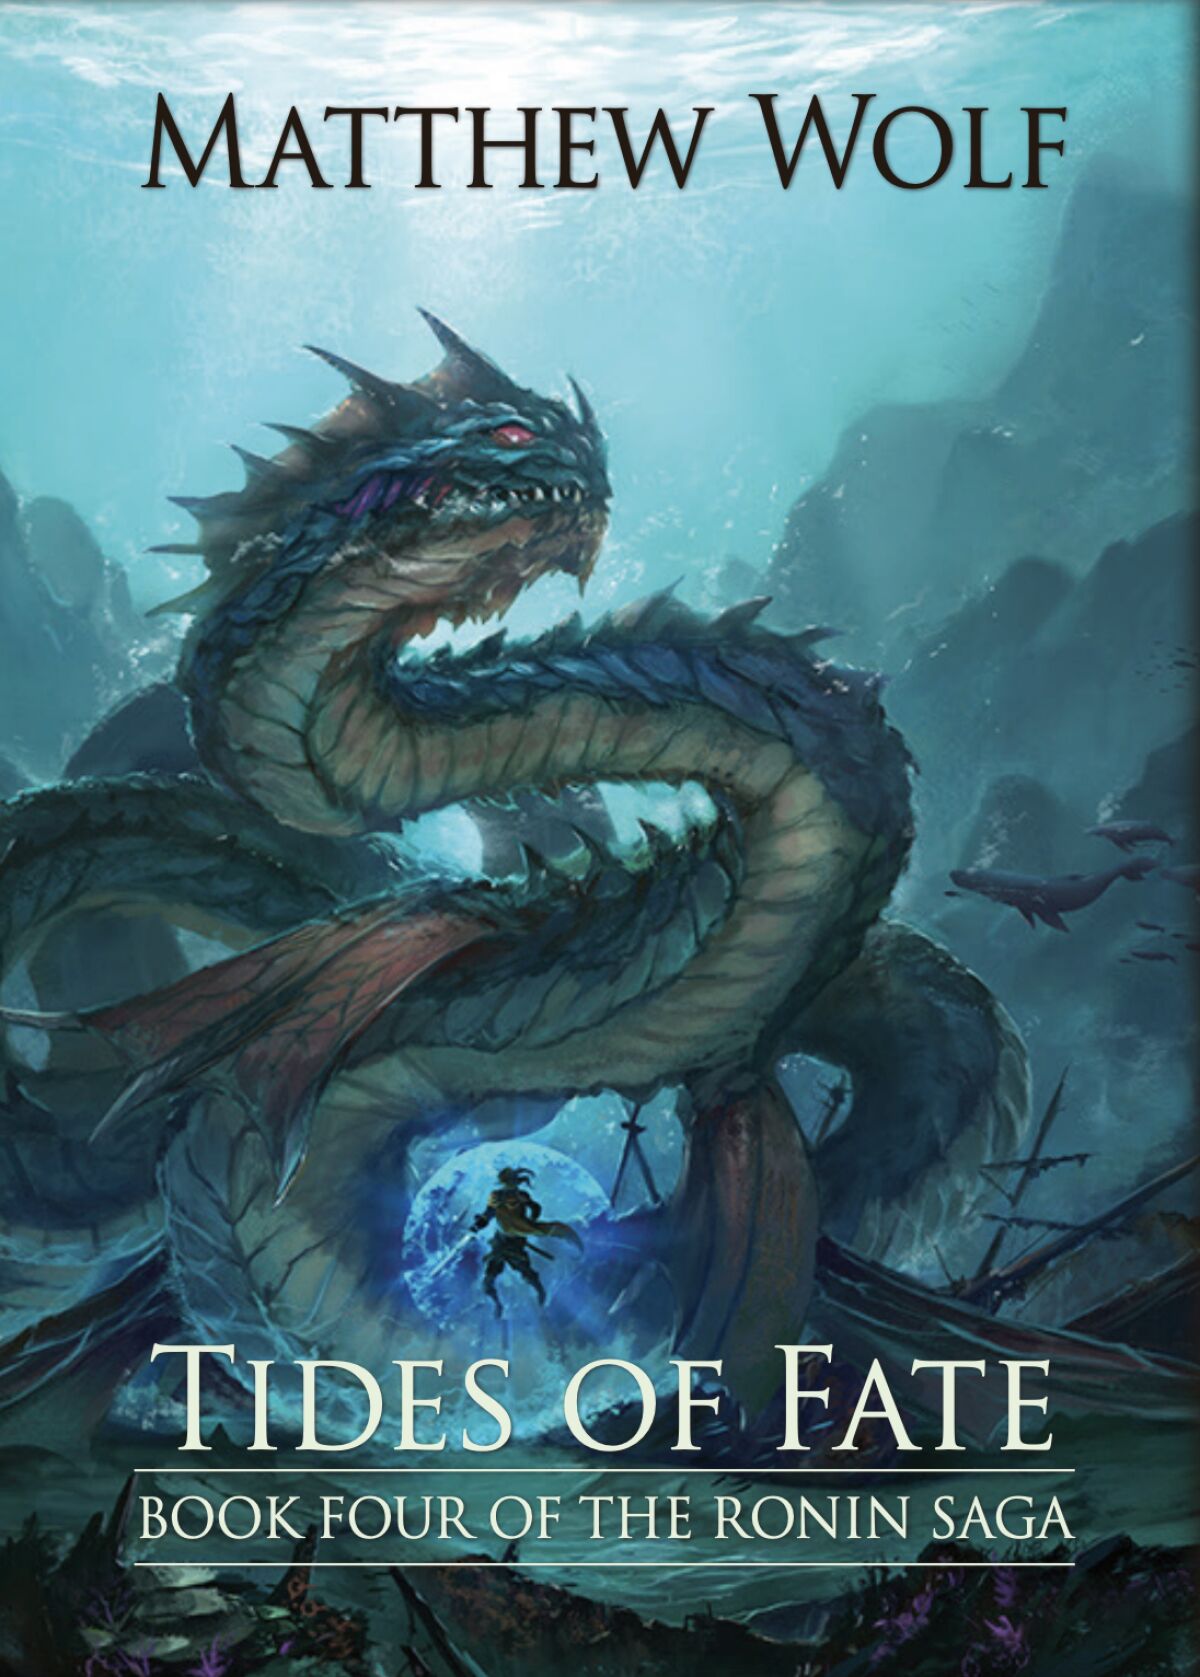 The cover of "Tides of Fate" by Matthew Wolf